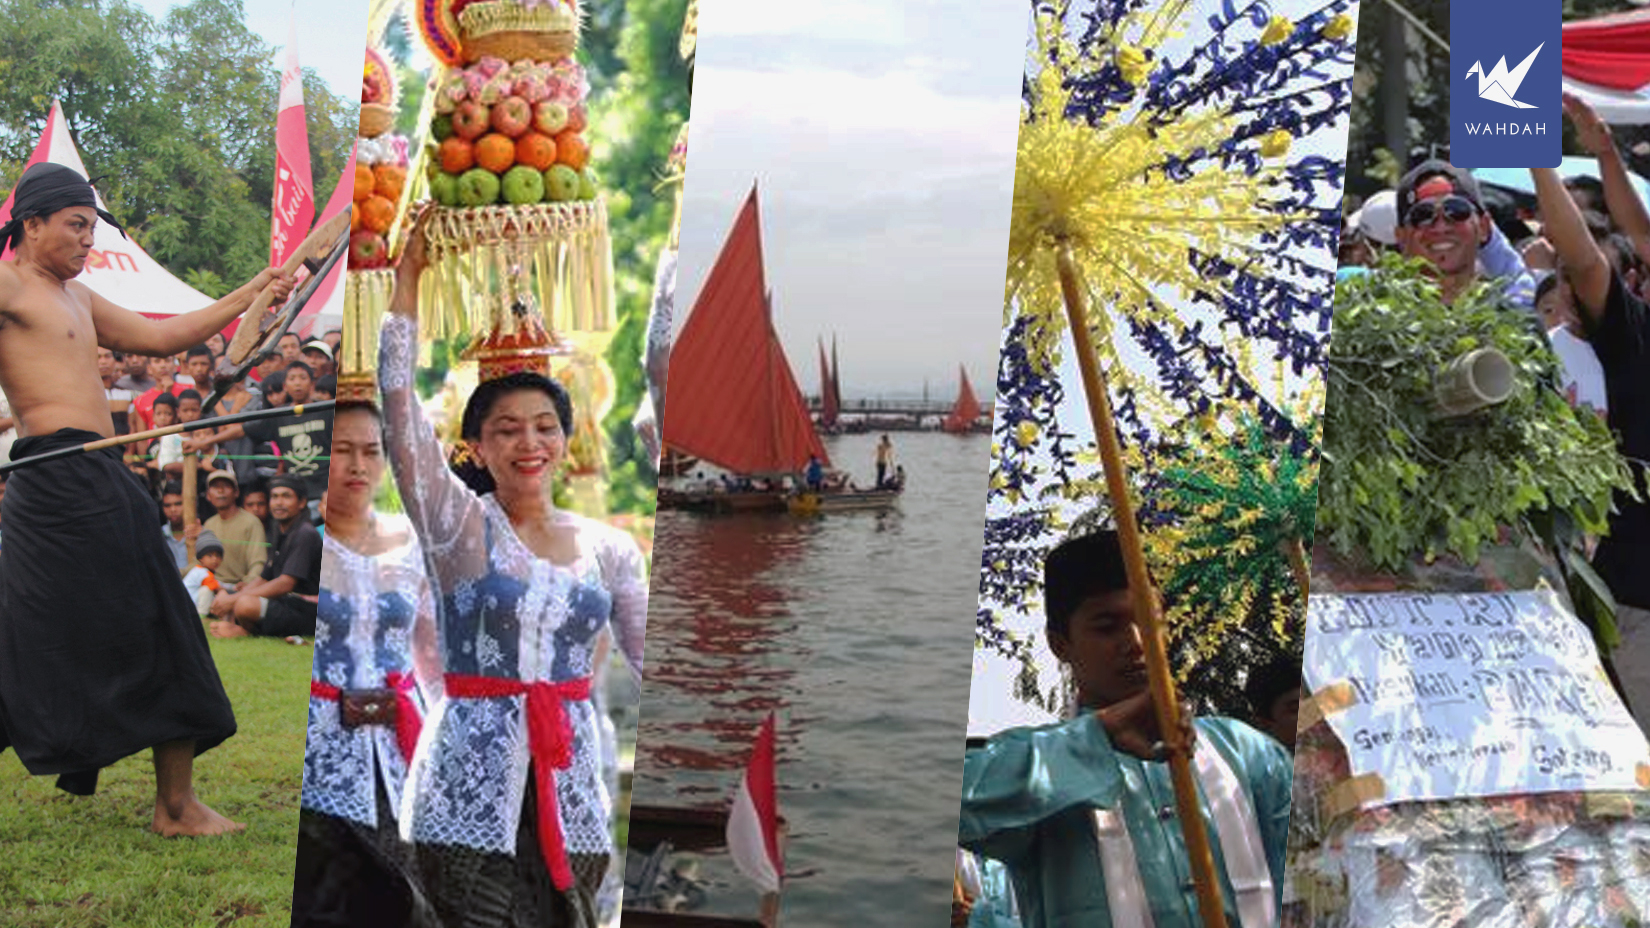 Unique Traditions for Celebrating August 17th Across Indonesia